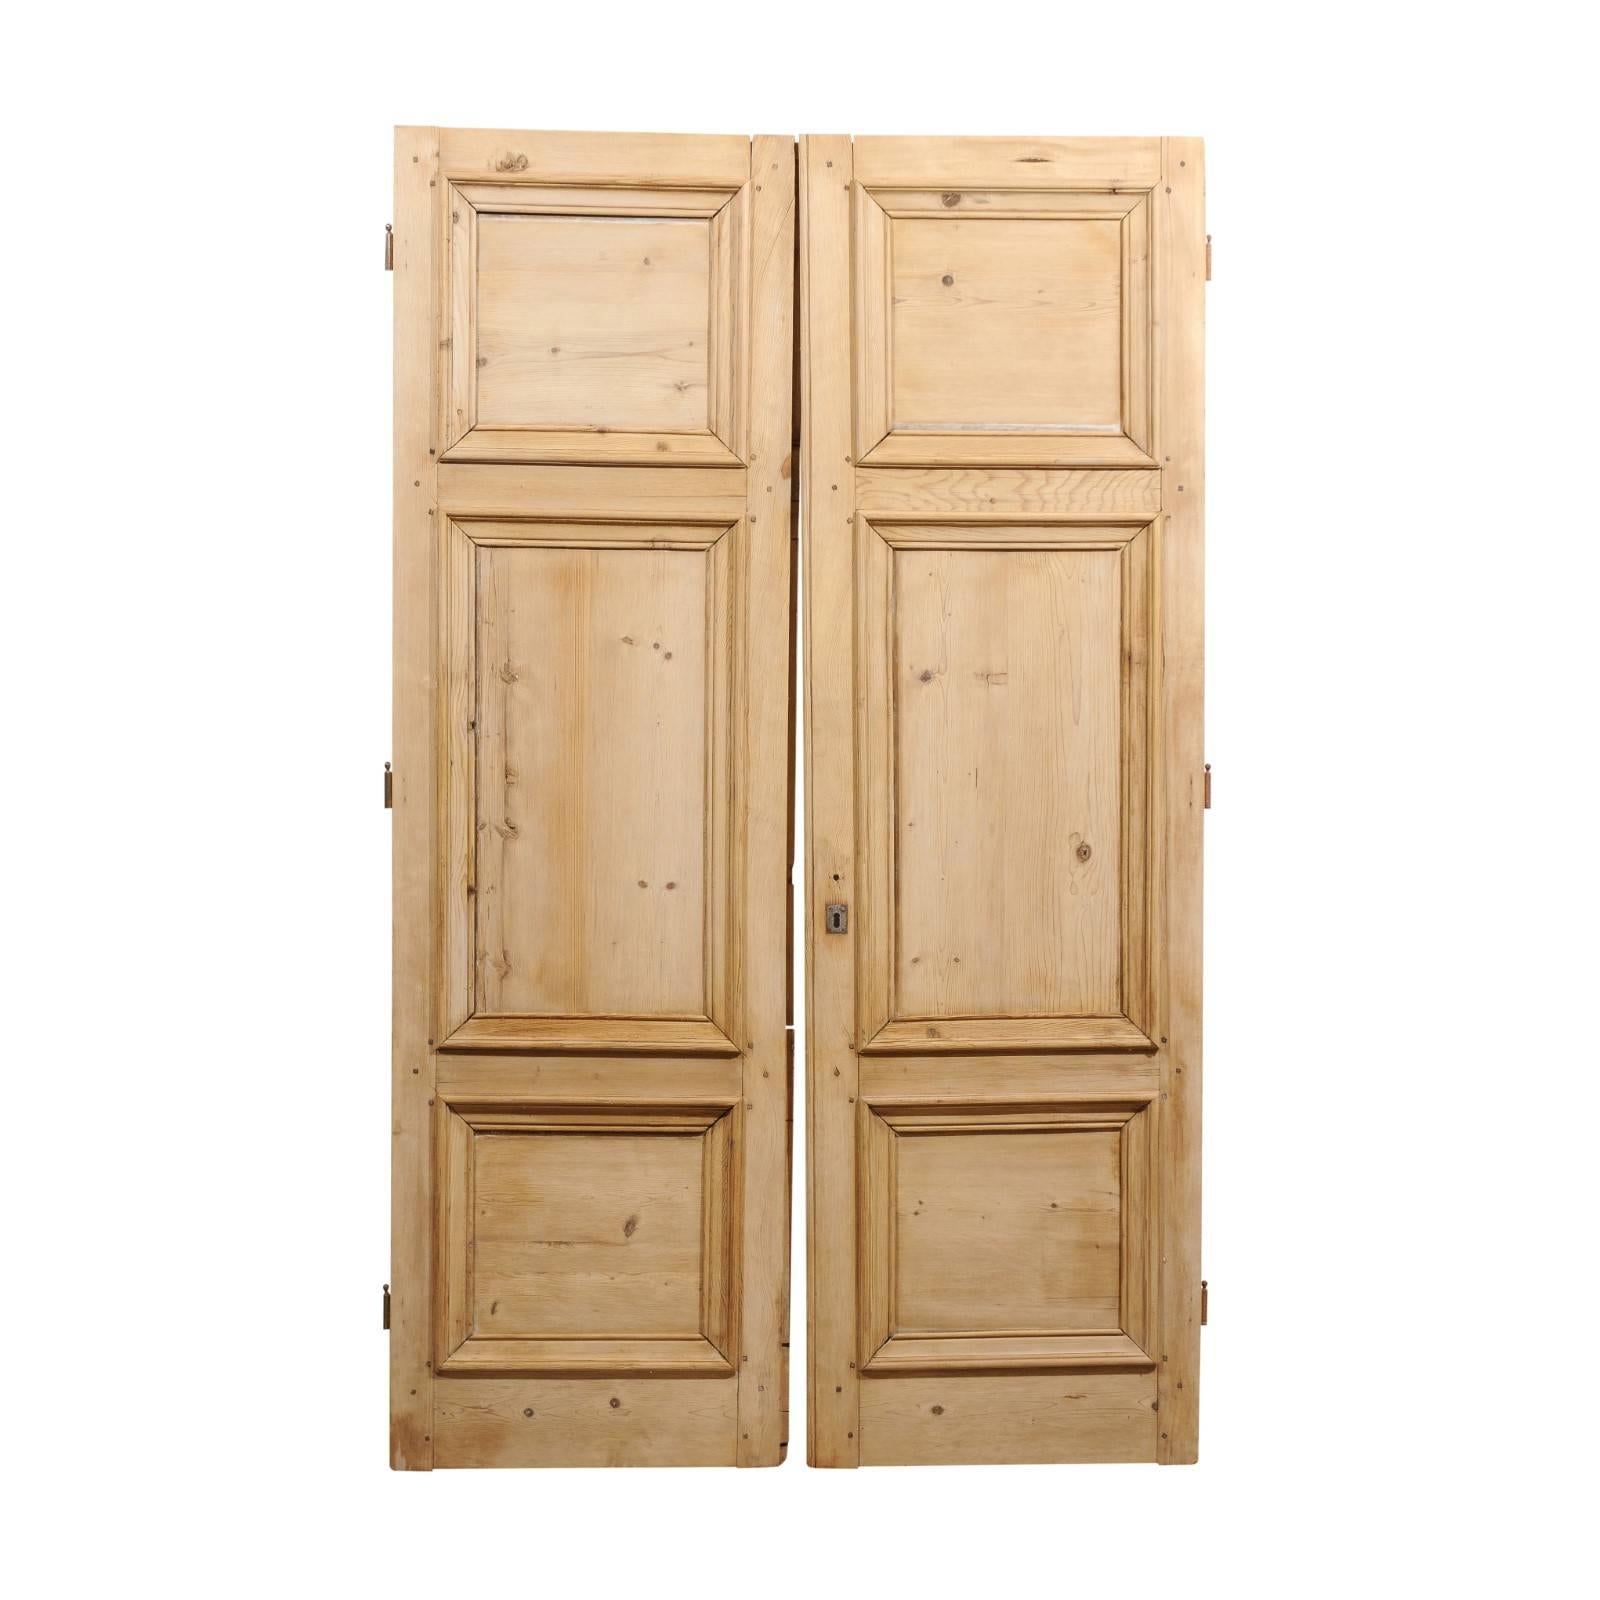 Pair of 19th Century French Haussmannian Wooden Doors with Molded Panels